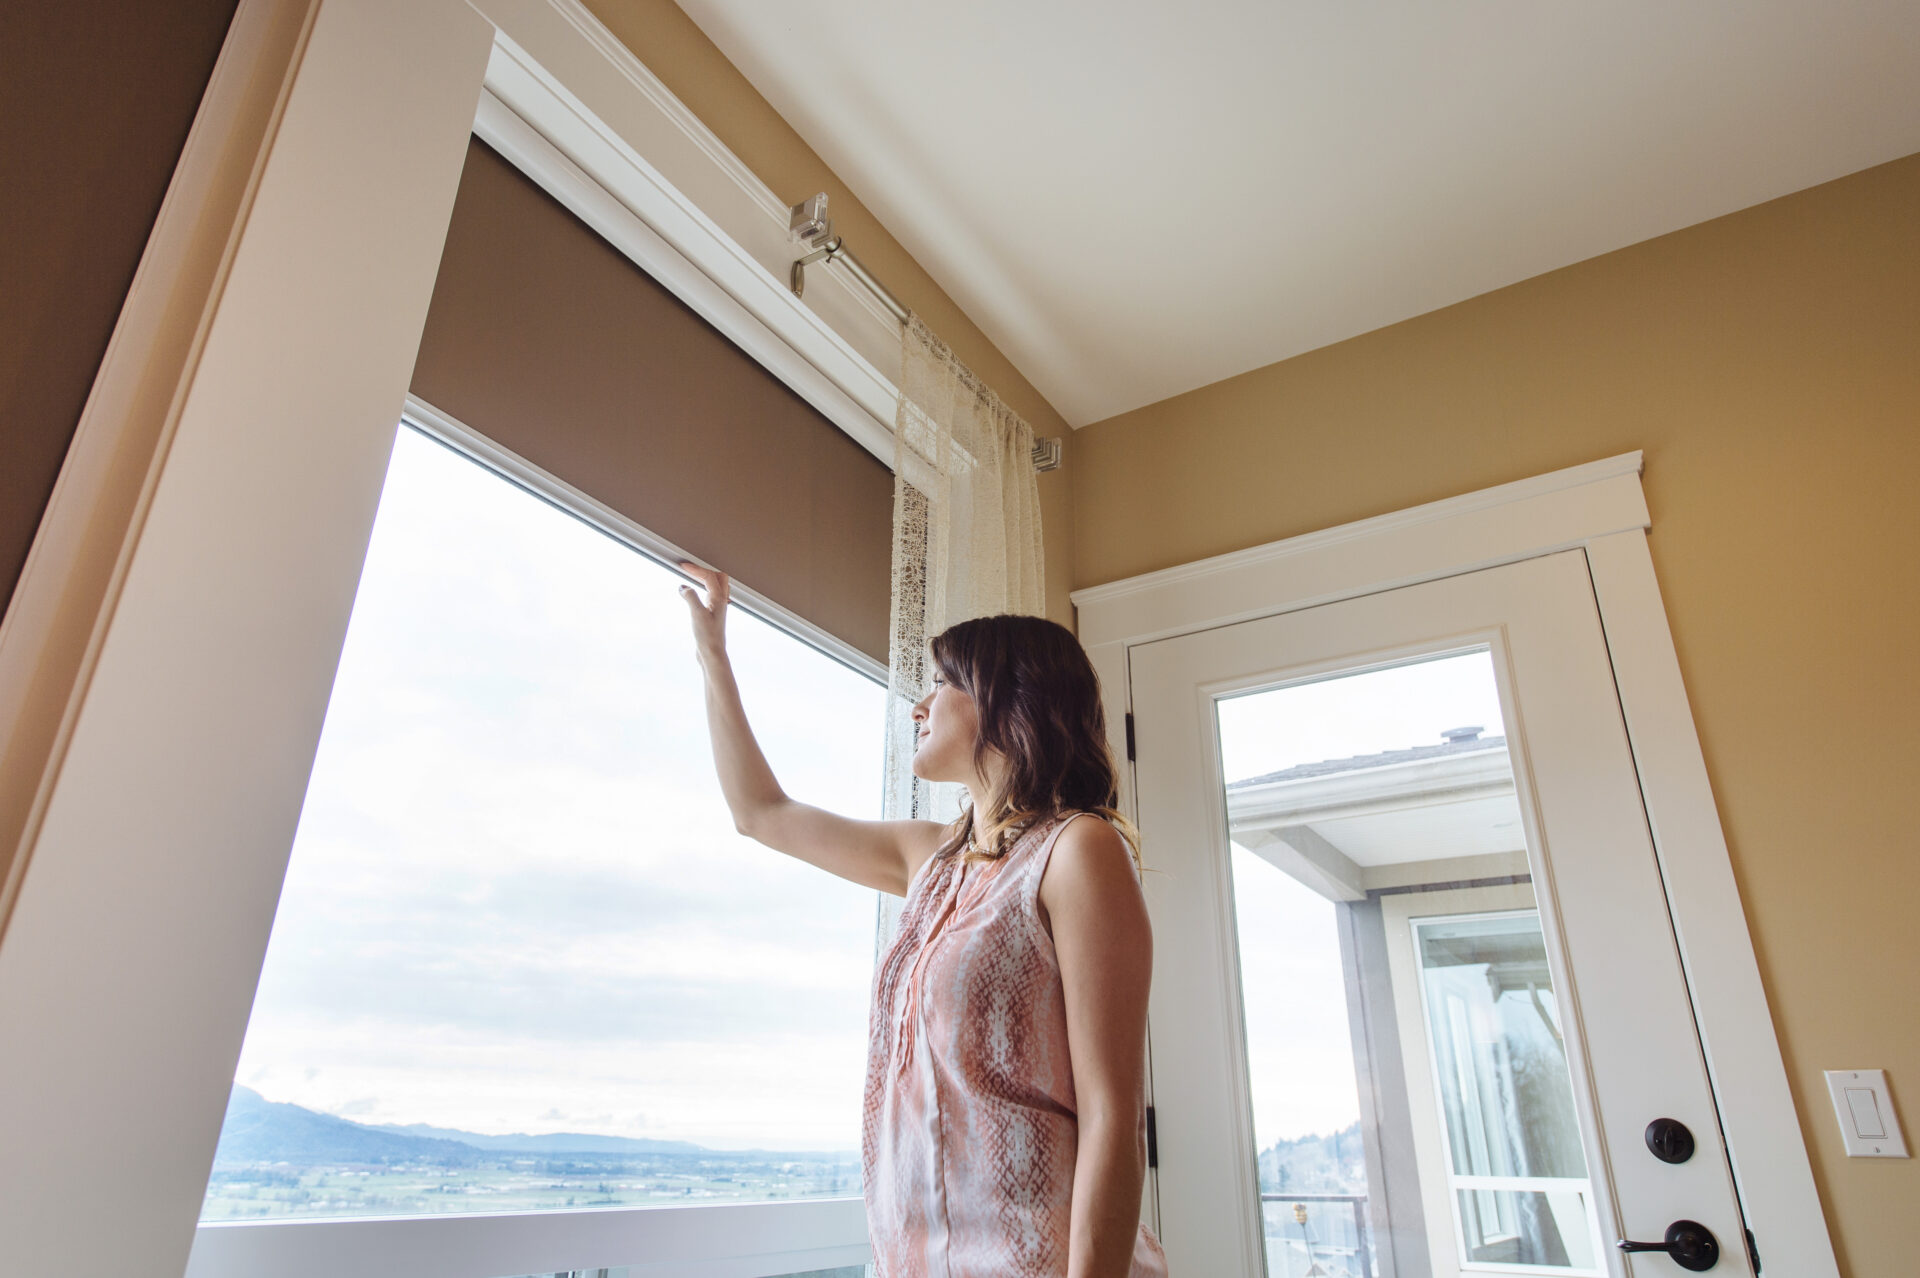 Phantom's Retractable Window Screens never interfere with your view out and retract away when they're not needed. The screen rolls up and hides away on your window's framing.